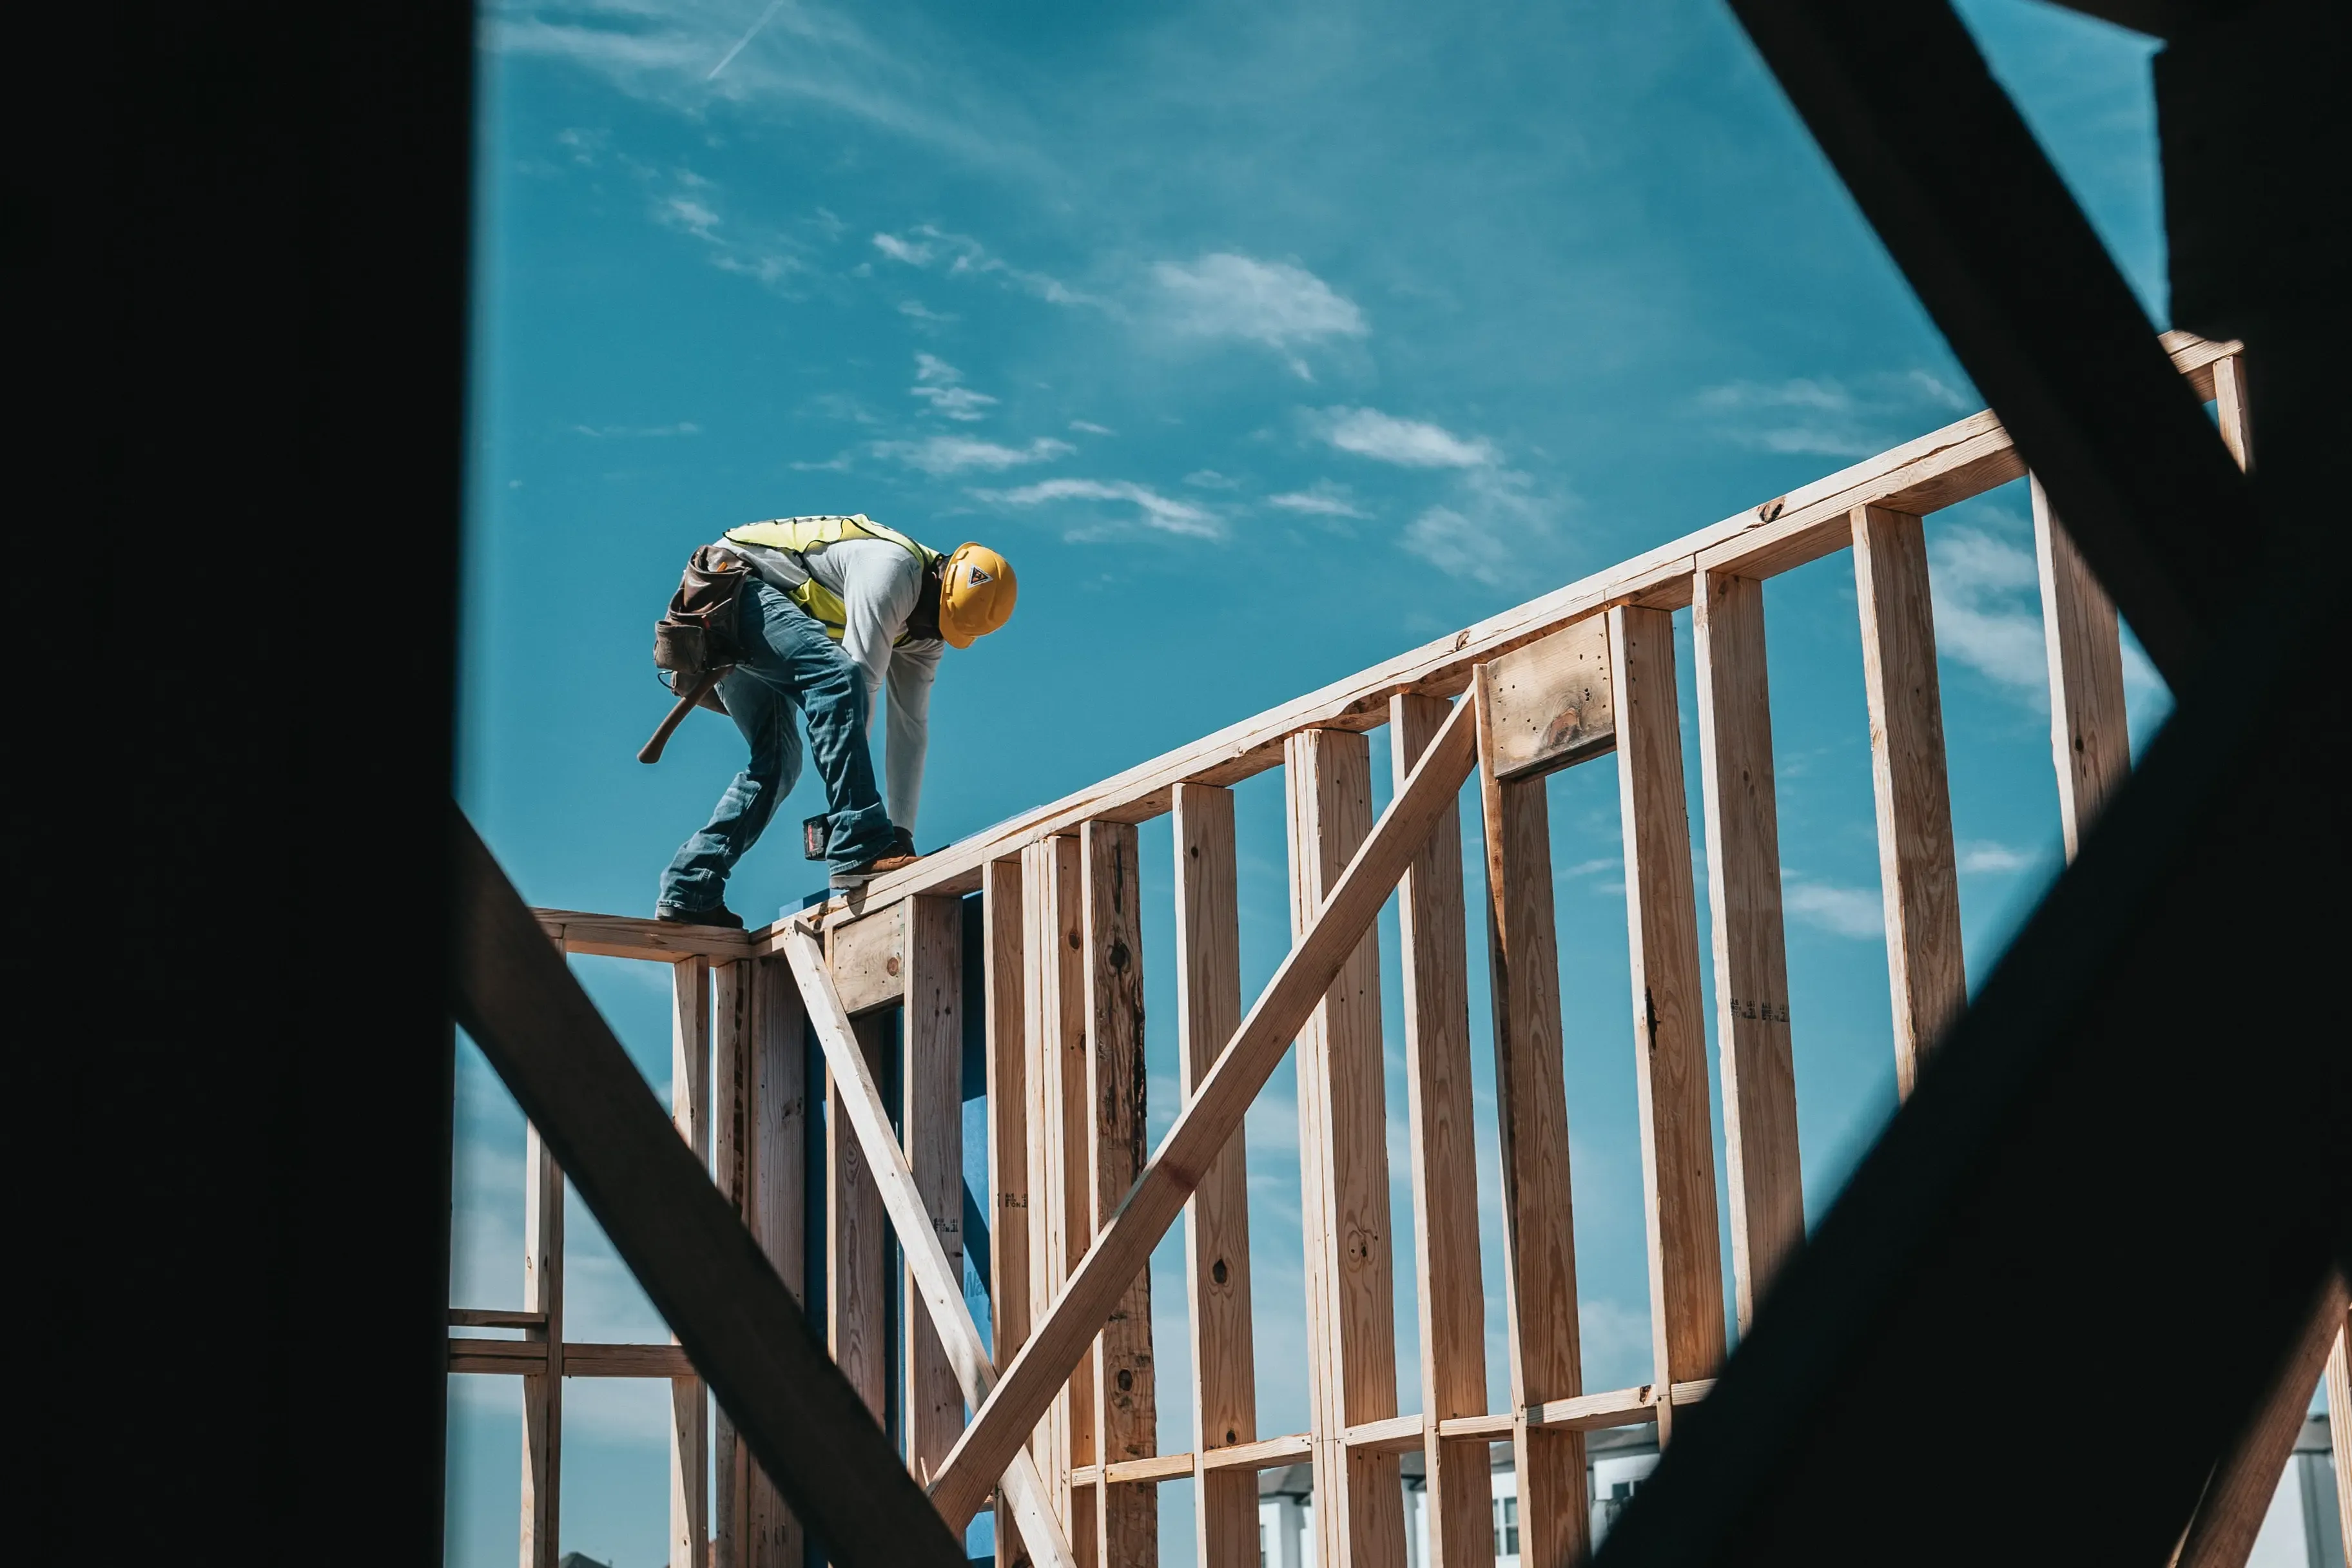 Construction worker on house frame